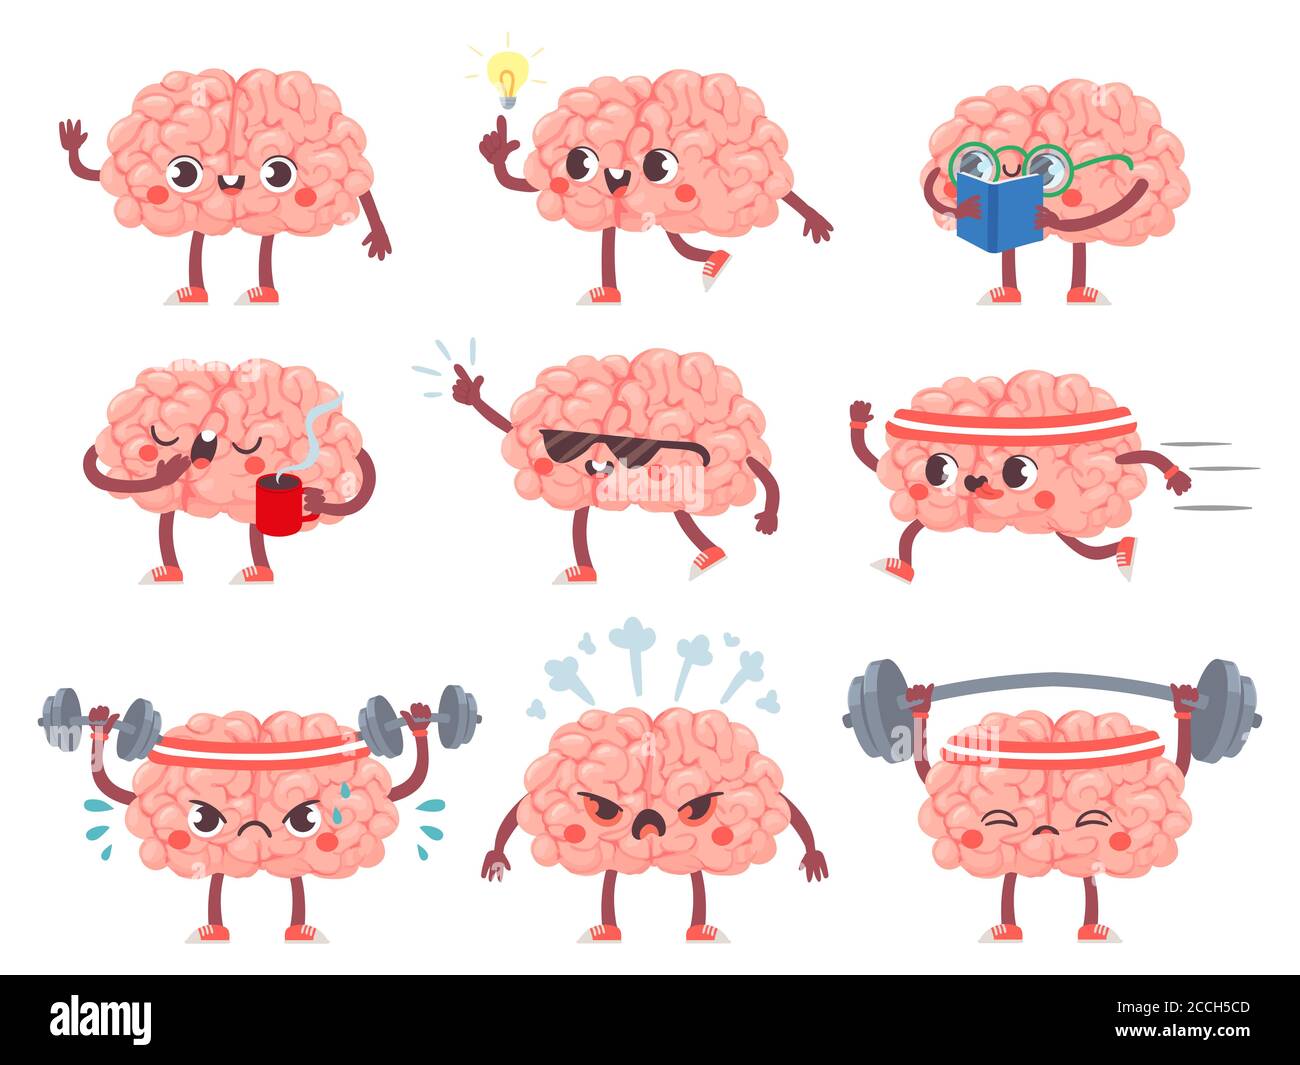 Brain characters. Happy brains in different poses and emotions, mental exercise, education metaphor creative mascot icons cartoon vector set Stock Vector